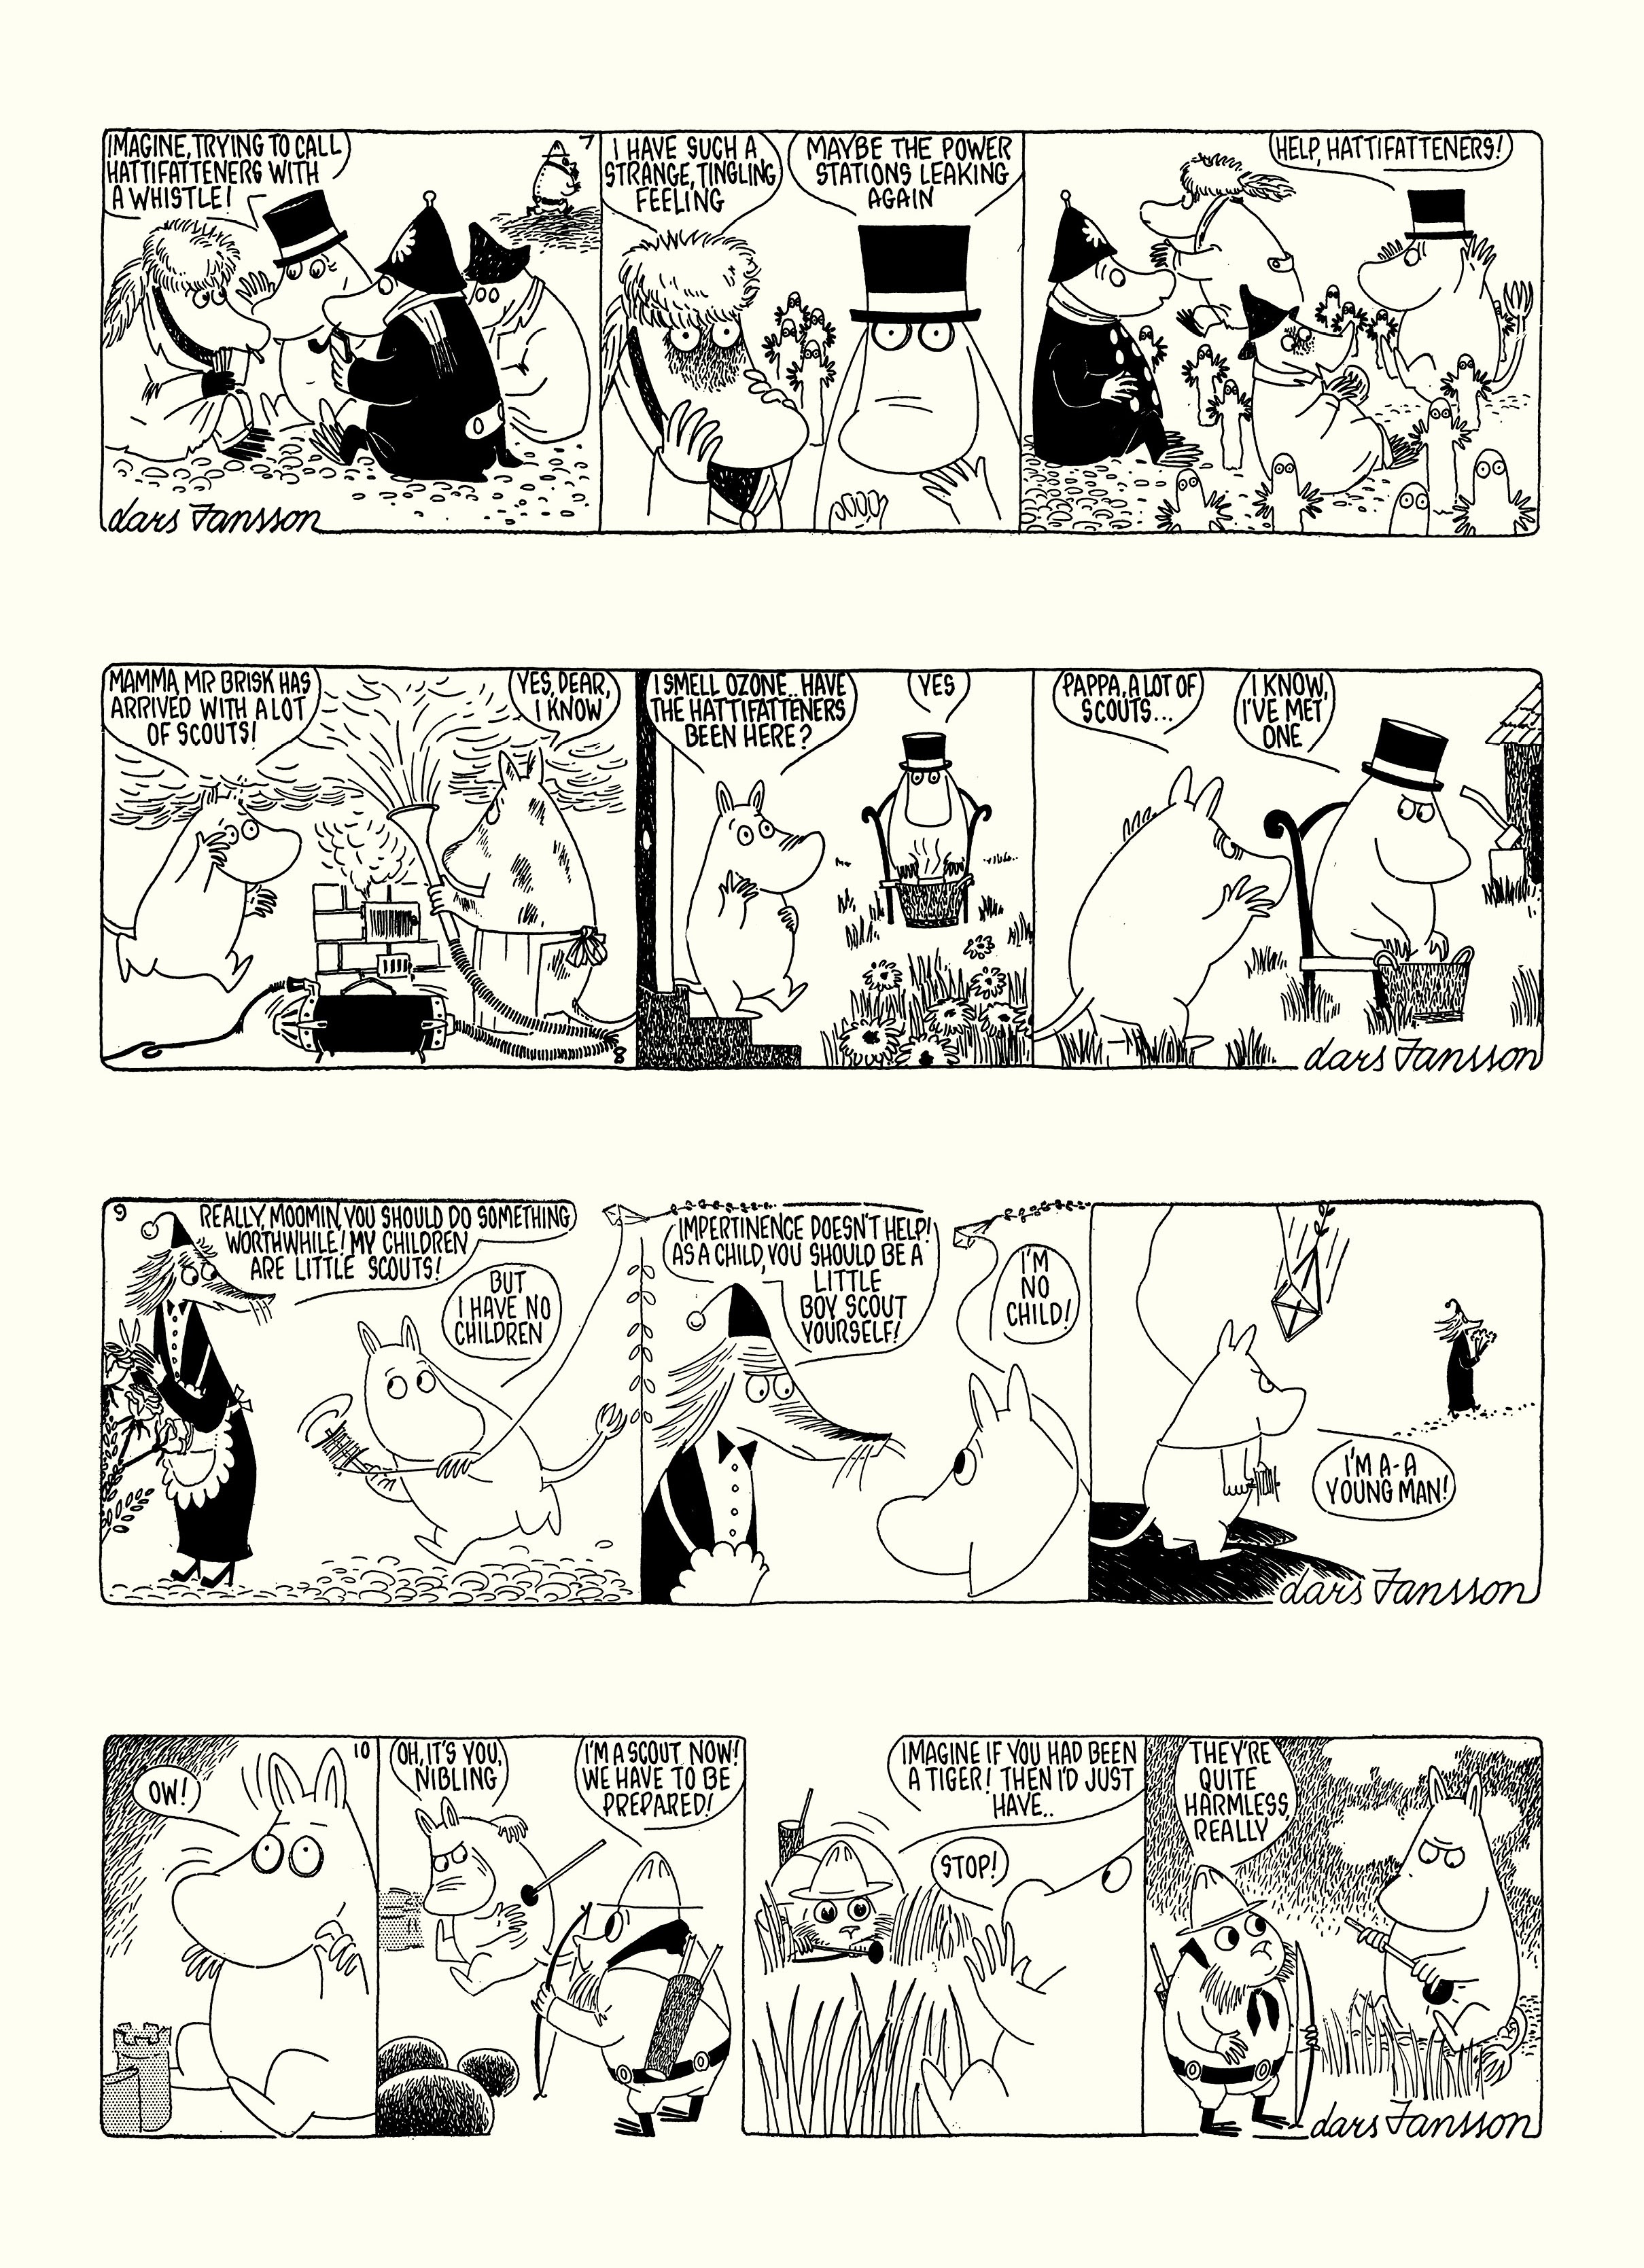 Read online Moomin: The Complete Lars Jansson Comic Strip comic -  Issue # TPB 7 - 29